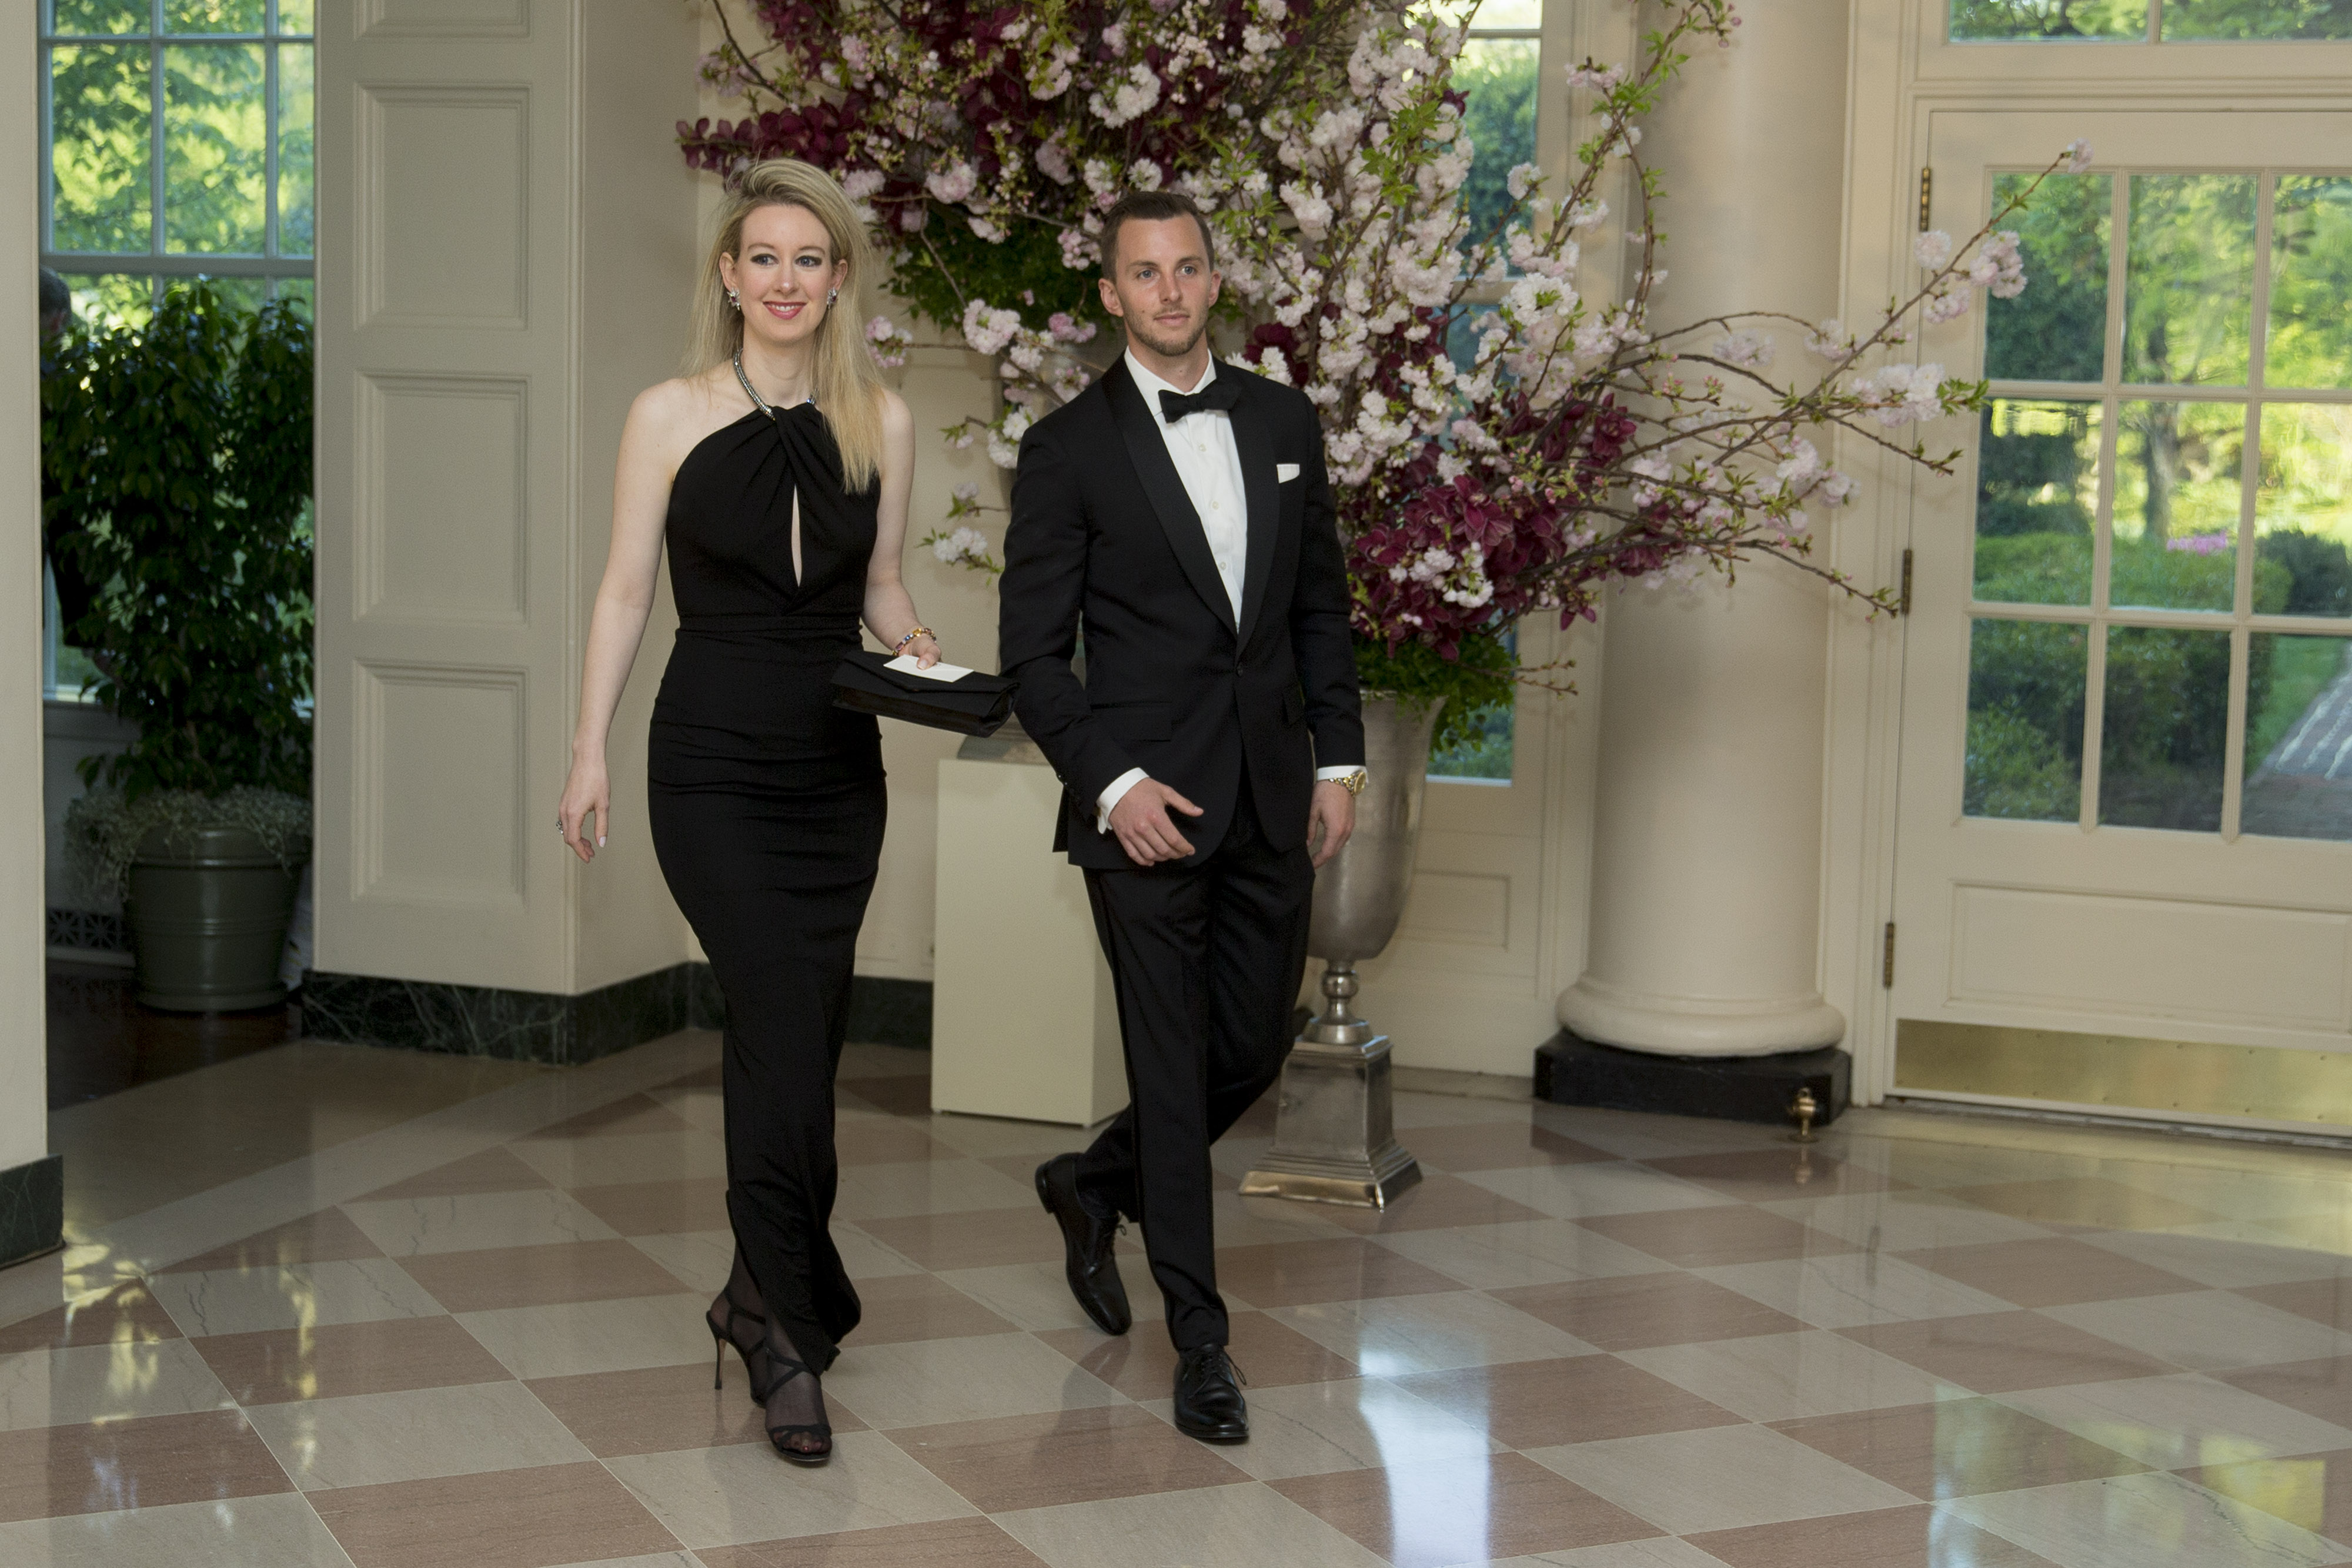 Elizabeth Holmes, founder and chief executive officer of Theranos Inc., left, and her brother Christian Holmes at the White House in Washington, D.C., U.S., on Tuesday, April 28, 2015. | Source: Getty Images